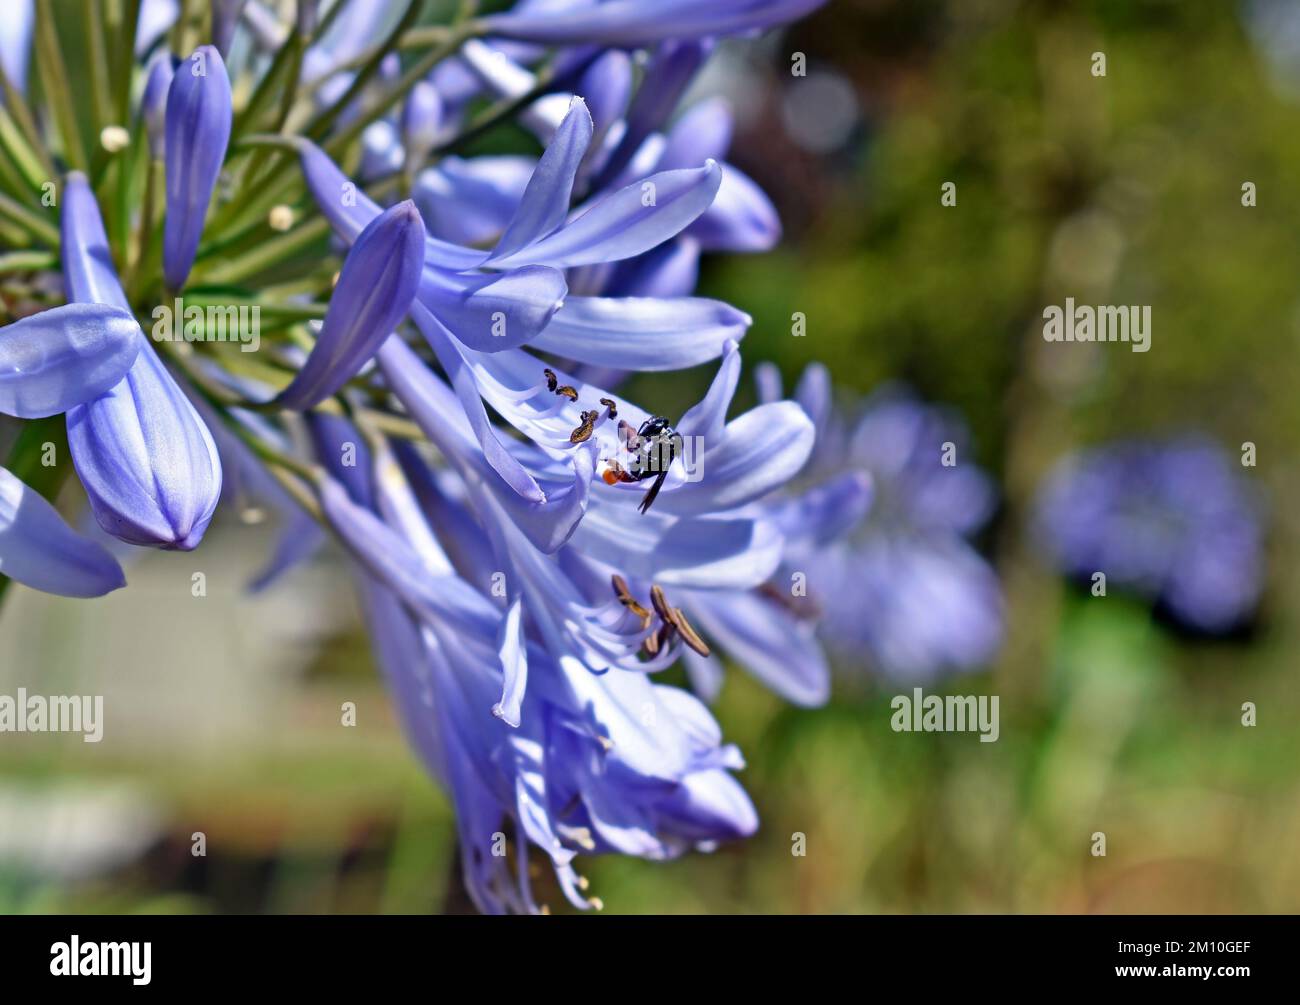 Stingless bee pollinating agapanthus flowers Stock Photo